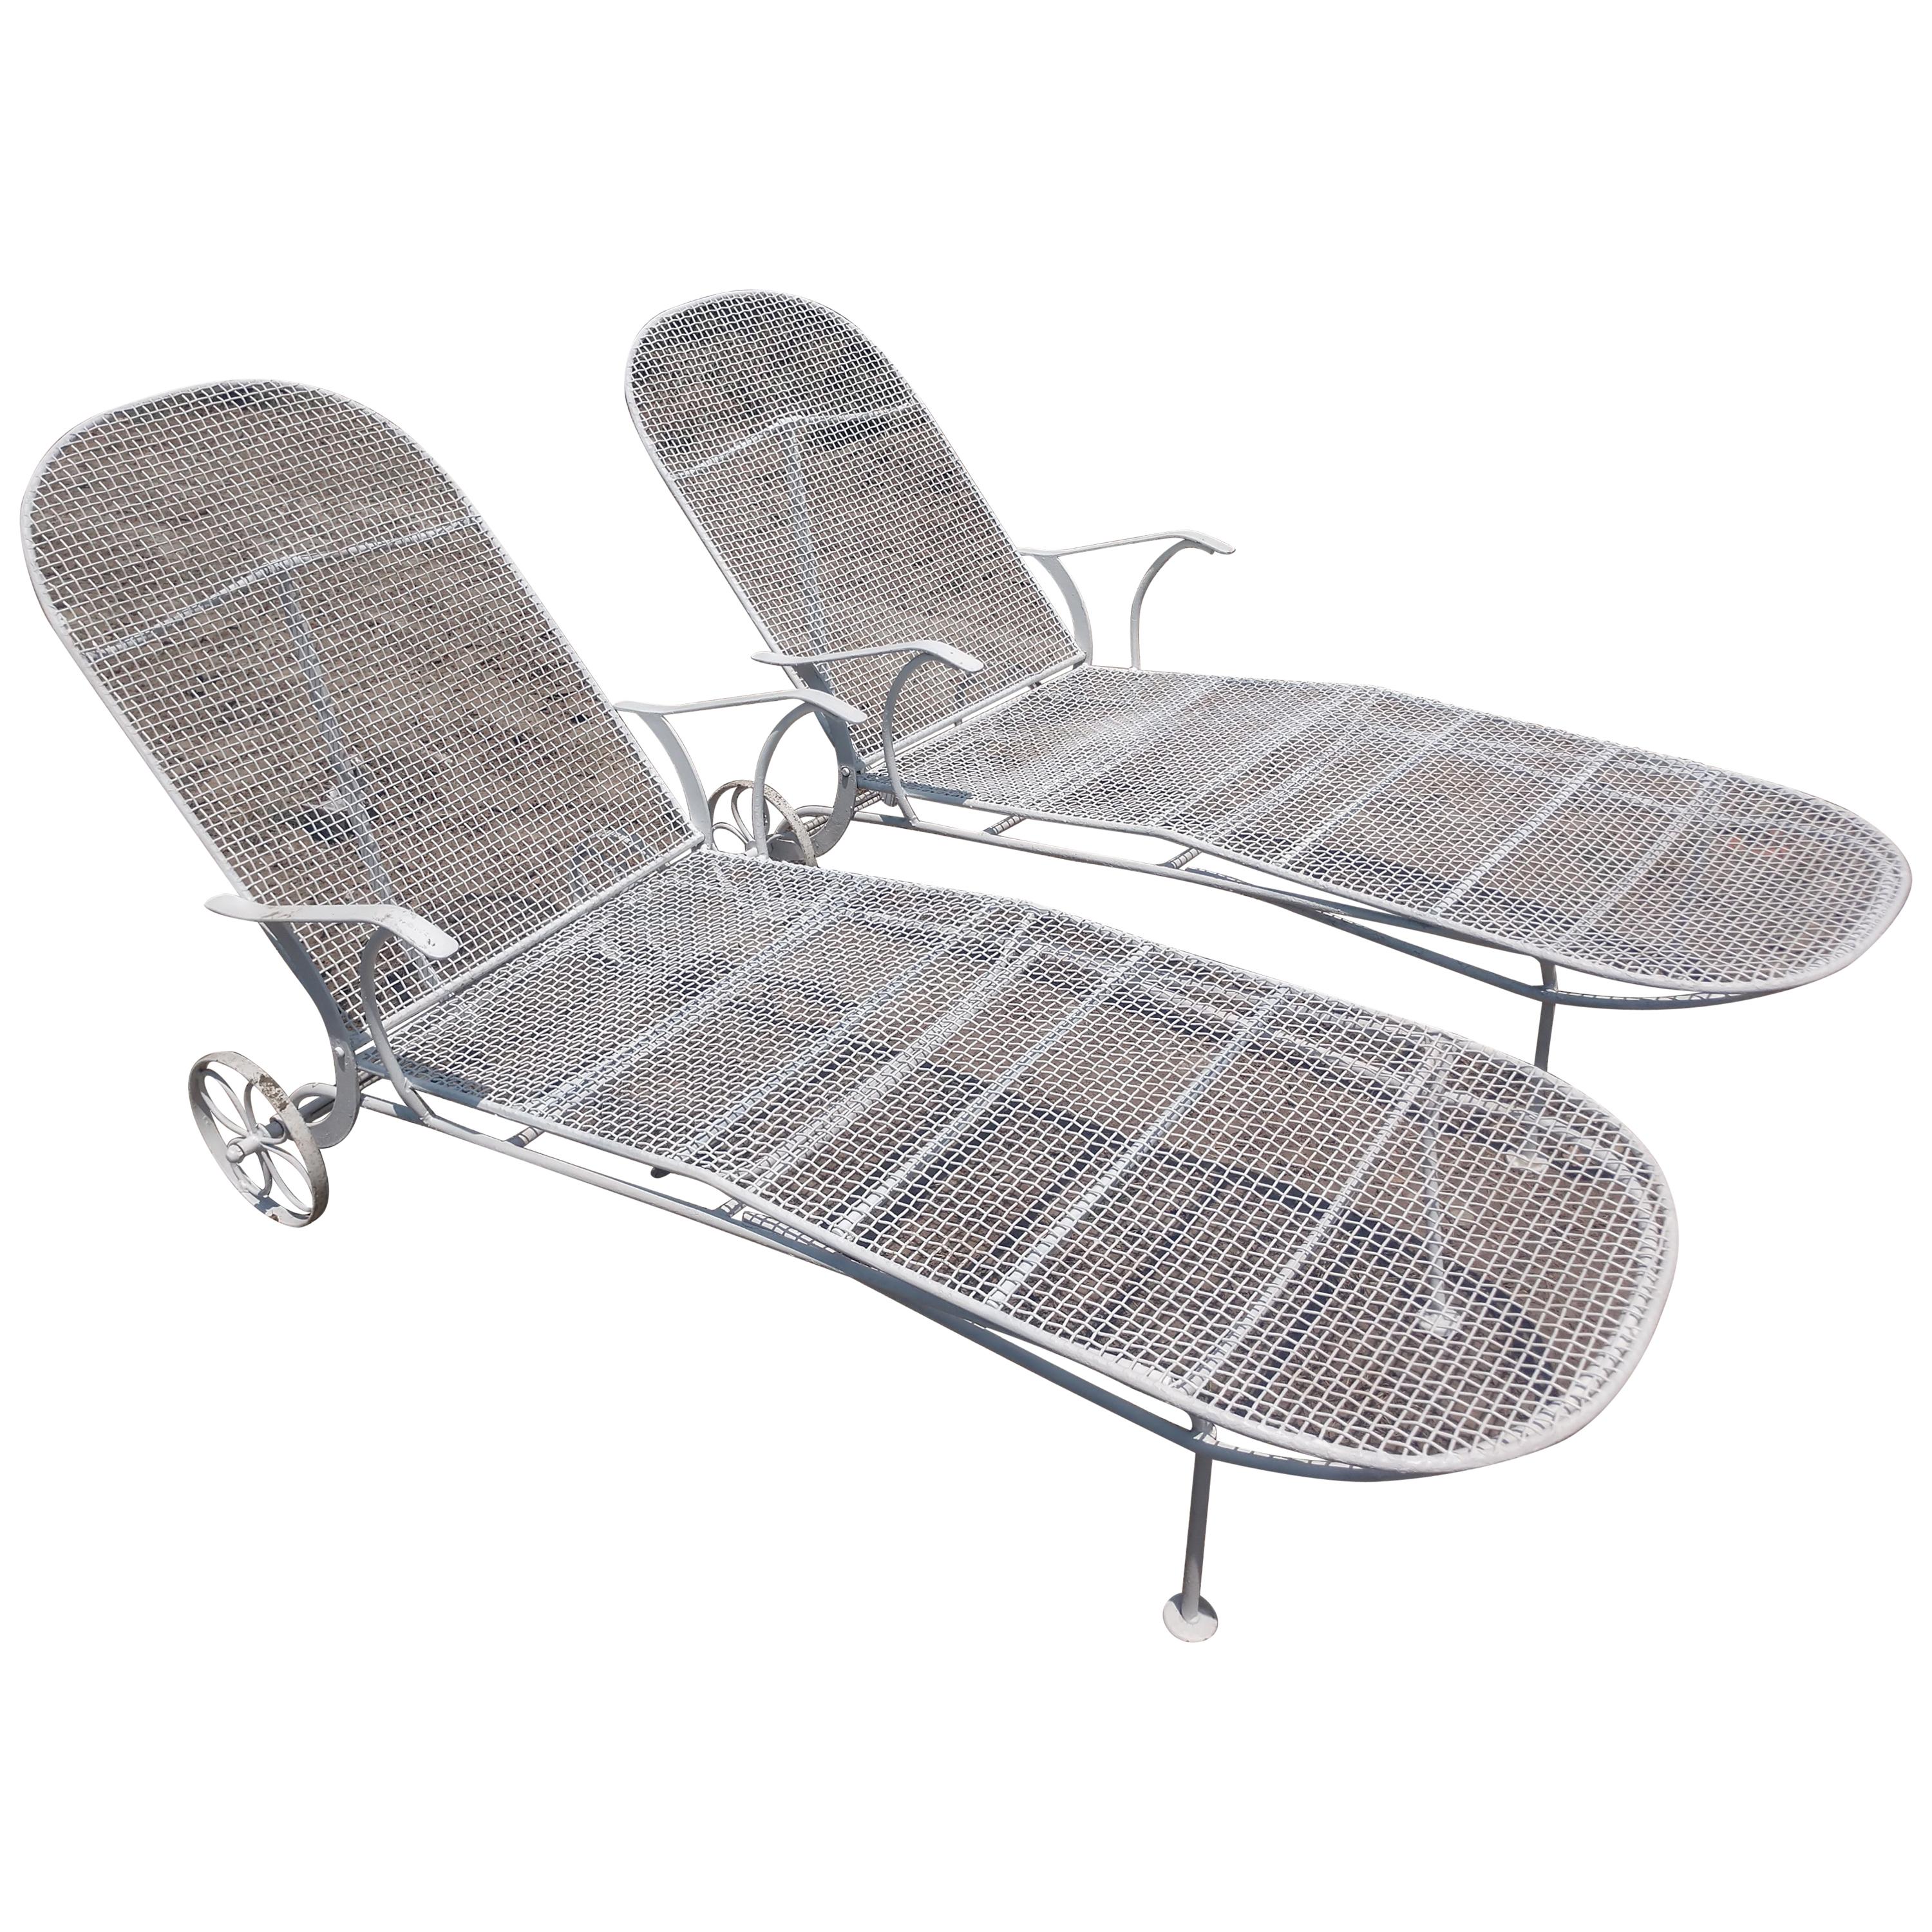 Pair of Sculptura Outdoor Iron Chaise Lounges by Russell Woodard